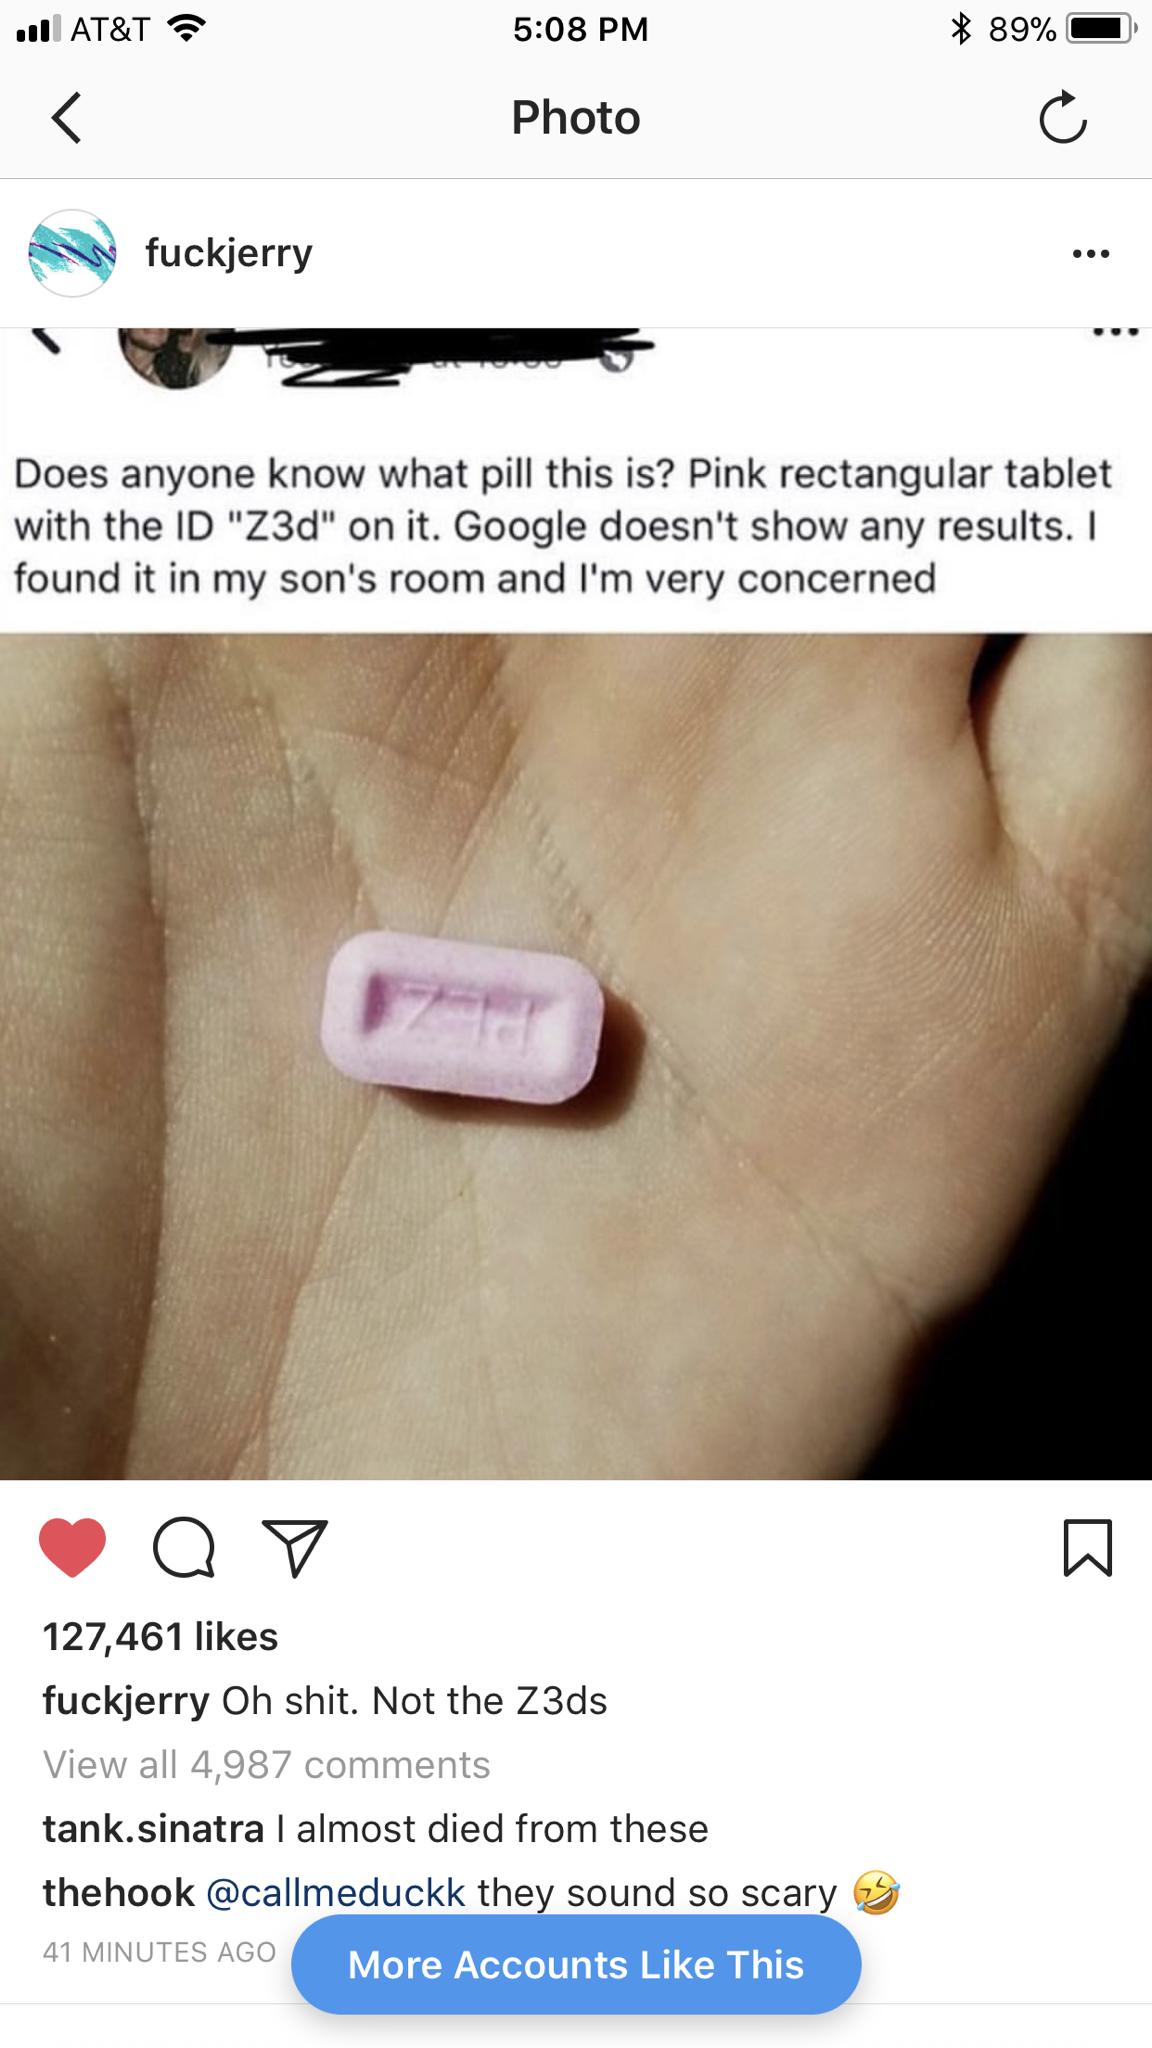 z3d pink pill - u At&T 89% Photo fuckjerry Does anyone know what pill this is? Pink rectangular tablet with the Id "Z3d" on it. Google doesn't show any results. I found it in my son's room and I'm very concerned O 127,461 fuckjerry Oh shit. Not the Z3ds V